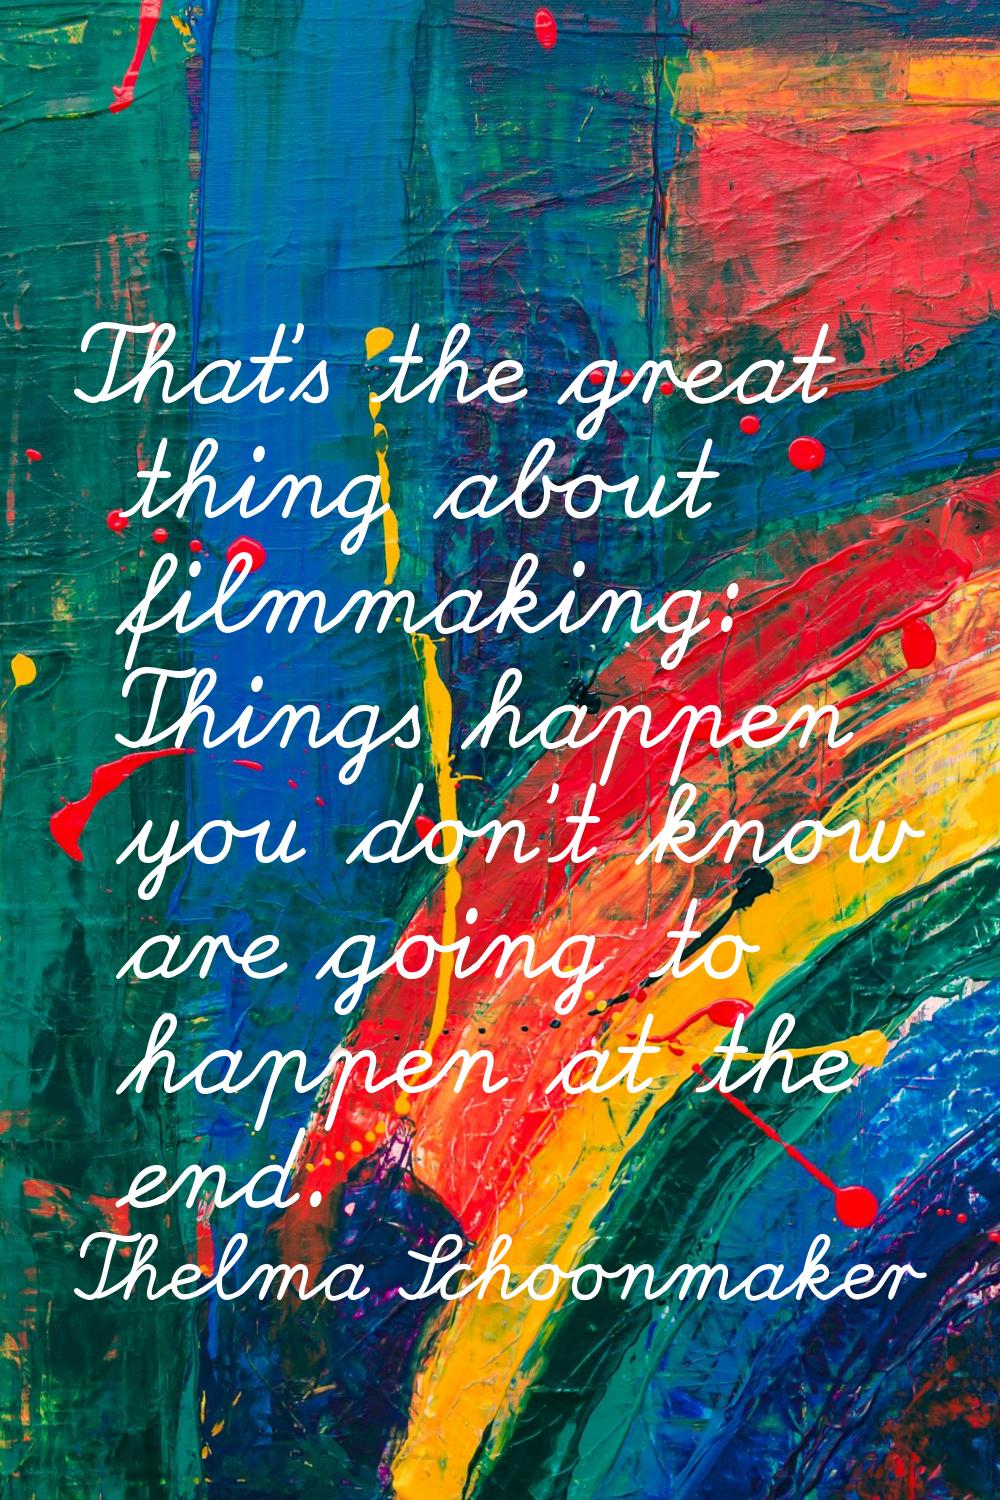 That's the great thing about filmmaking: Things happen you don't know are going to happen at the en